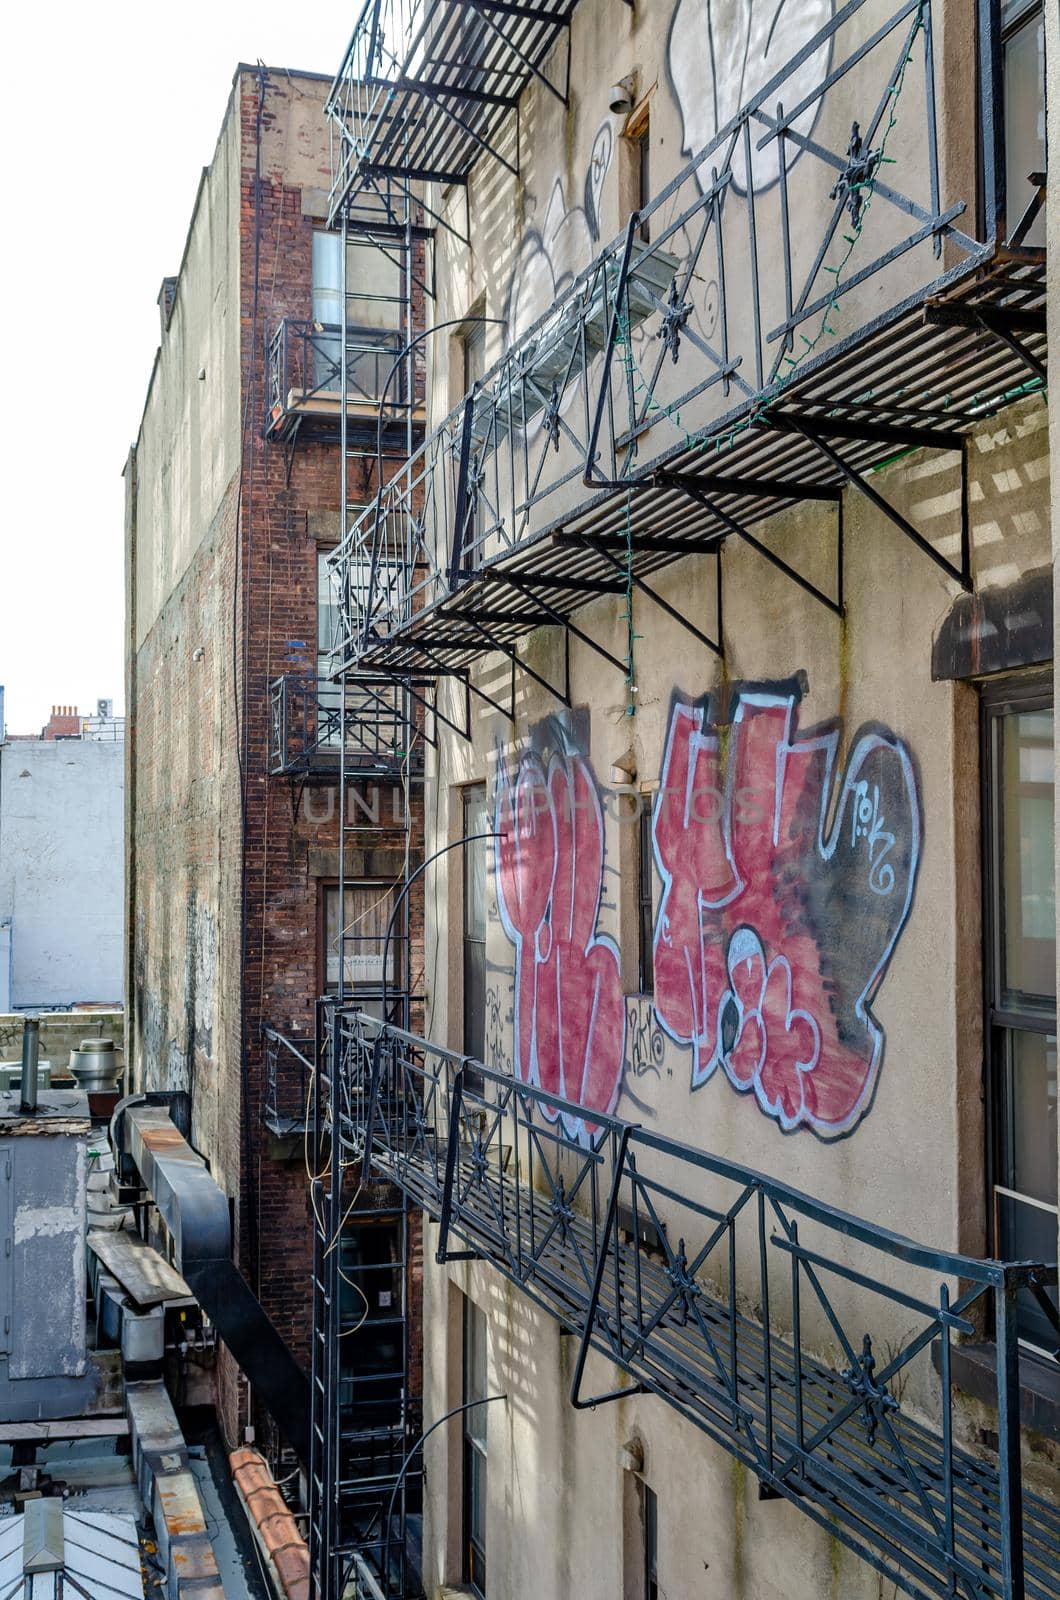 Rustic Residential Building Facade in Chelsea with Graffiti on the Wall, Emergency stairs at the Building, New York City during sunny winter day, vertical